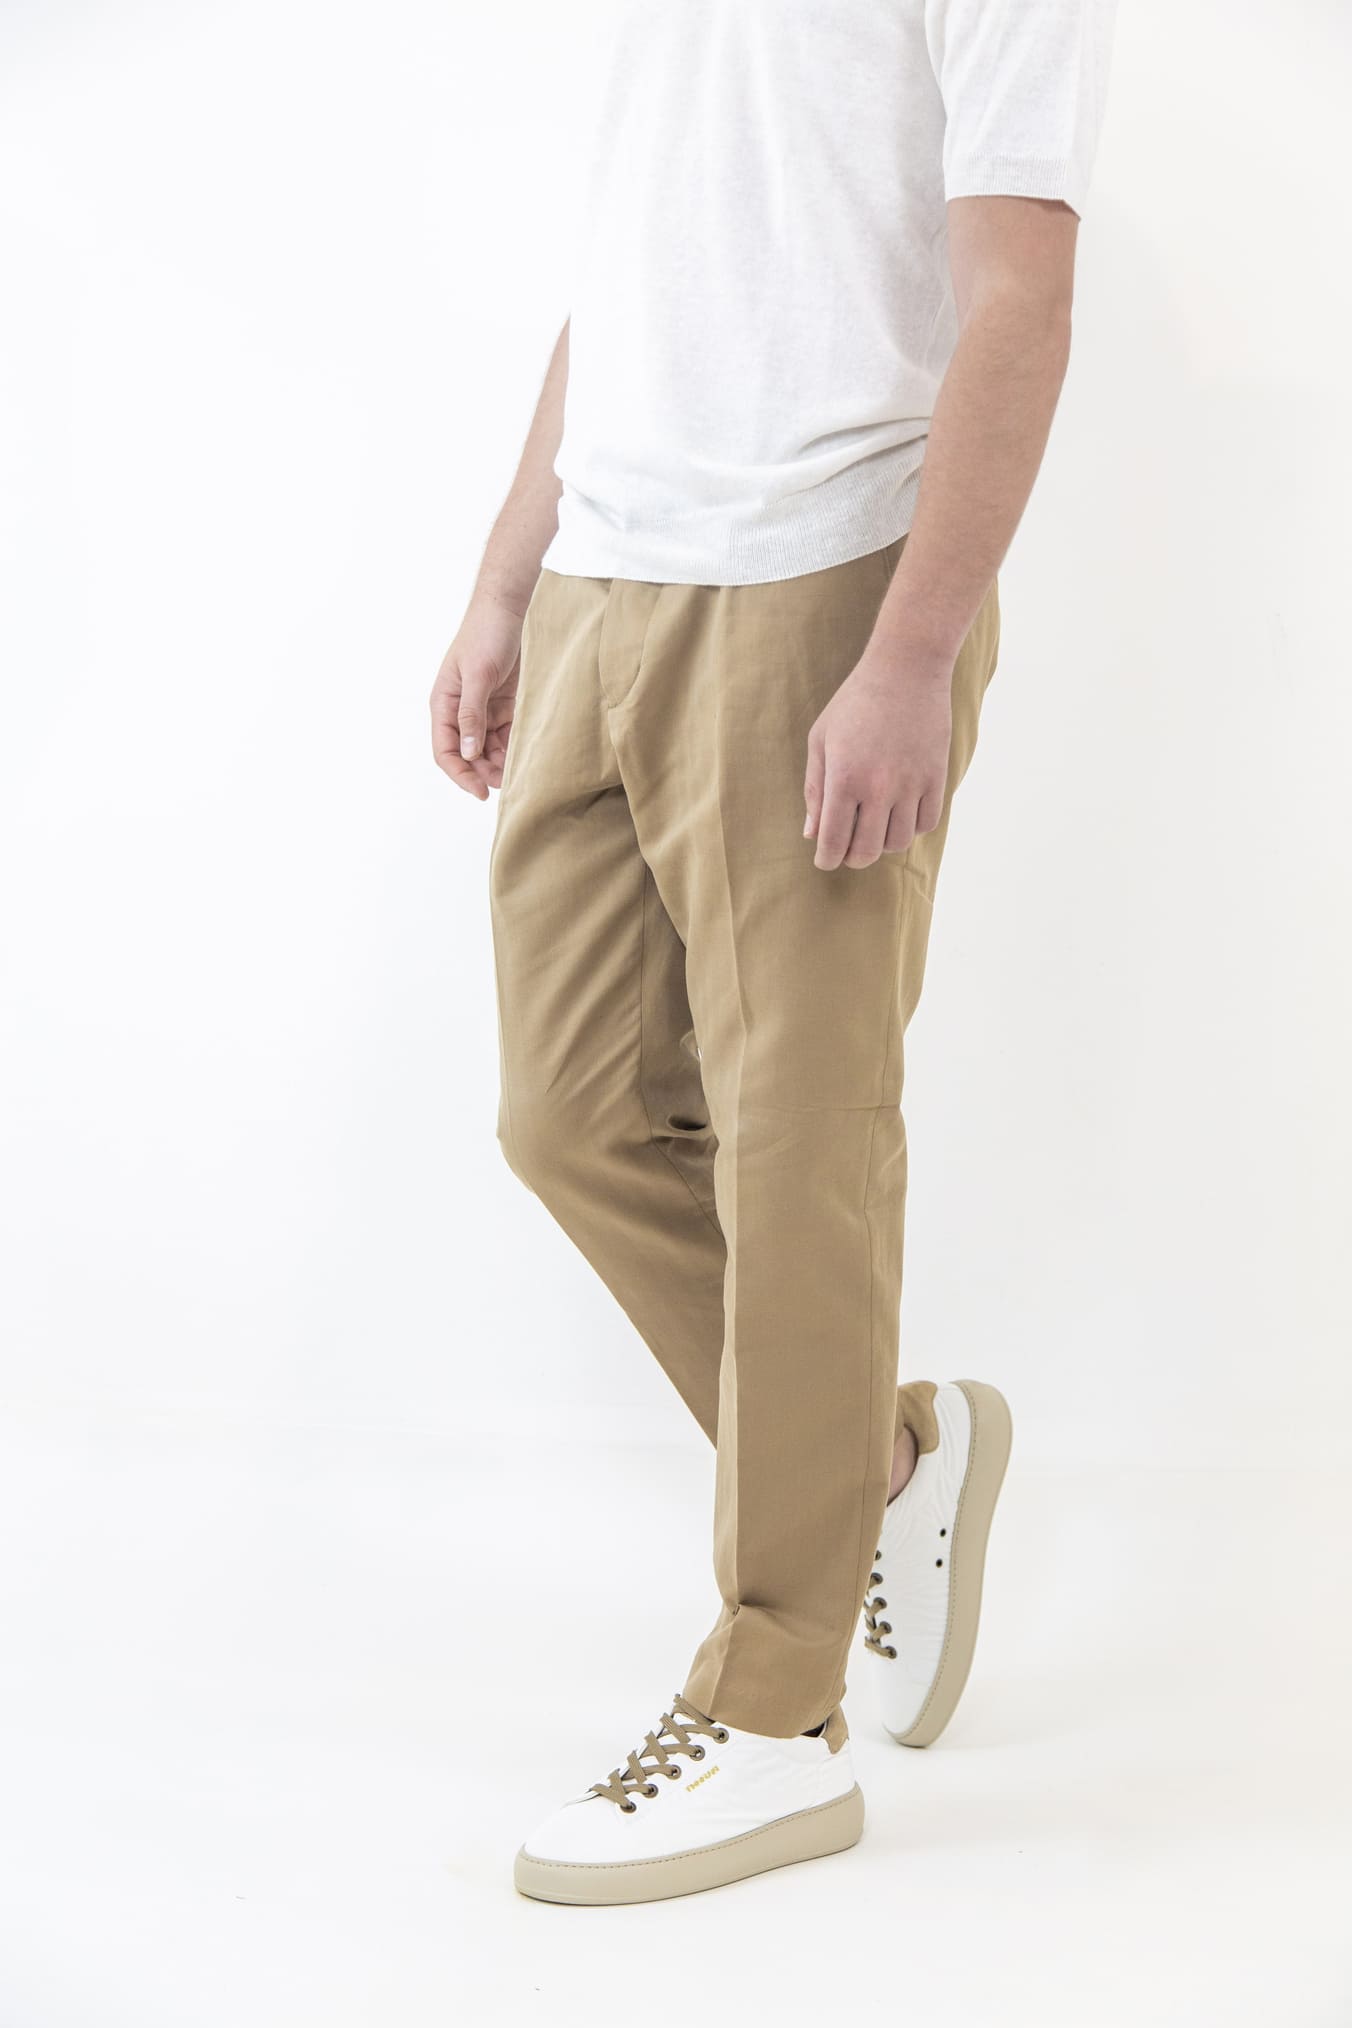 HINDUSTRIE Solaro Beige Cotton and Linen Trousers